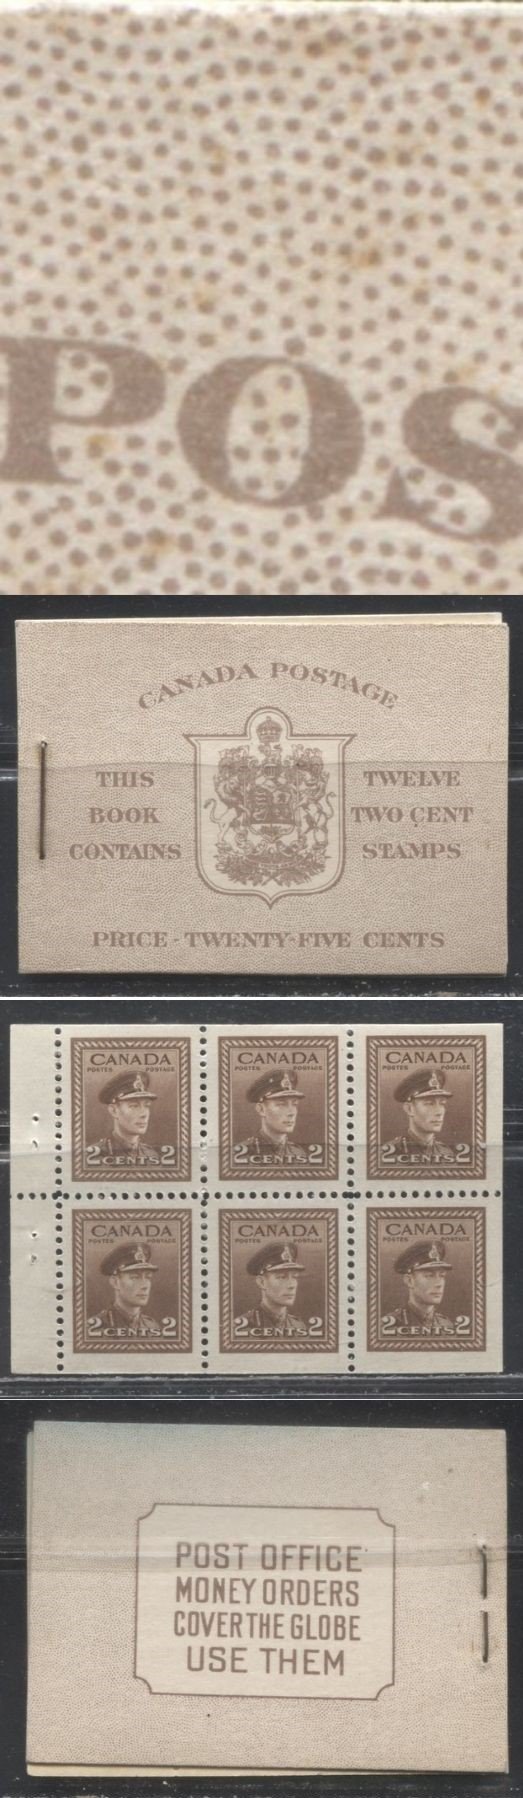 Lot 115 Canada #BK33a 1942-1949 War Issue, Complete 25¢ English Booklet, 2 Panes of 2c Brown, Smooth Vertical Wove Paper, Harris Front Cover Type IId, 6c Airmail Rate Page